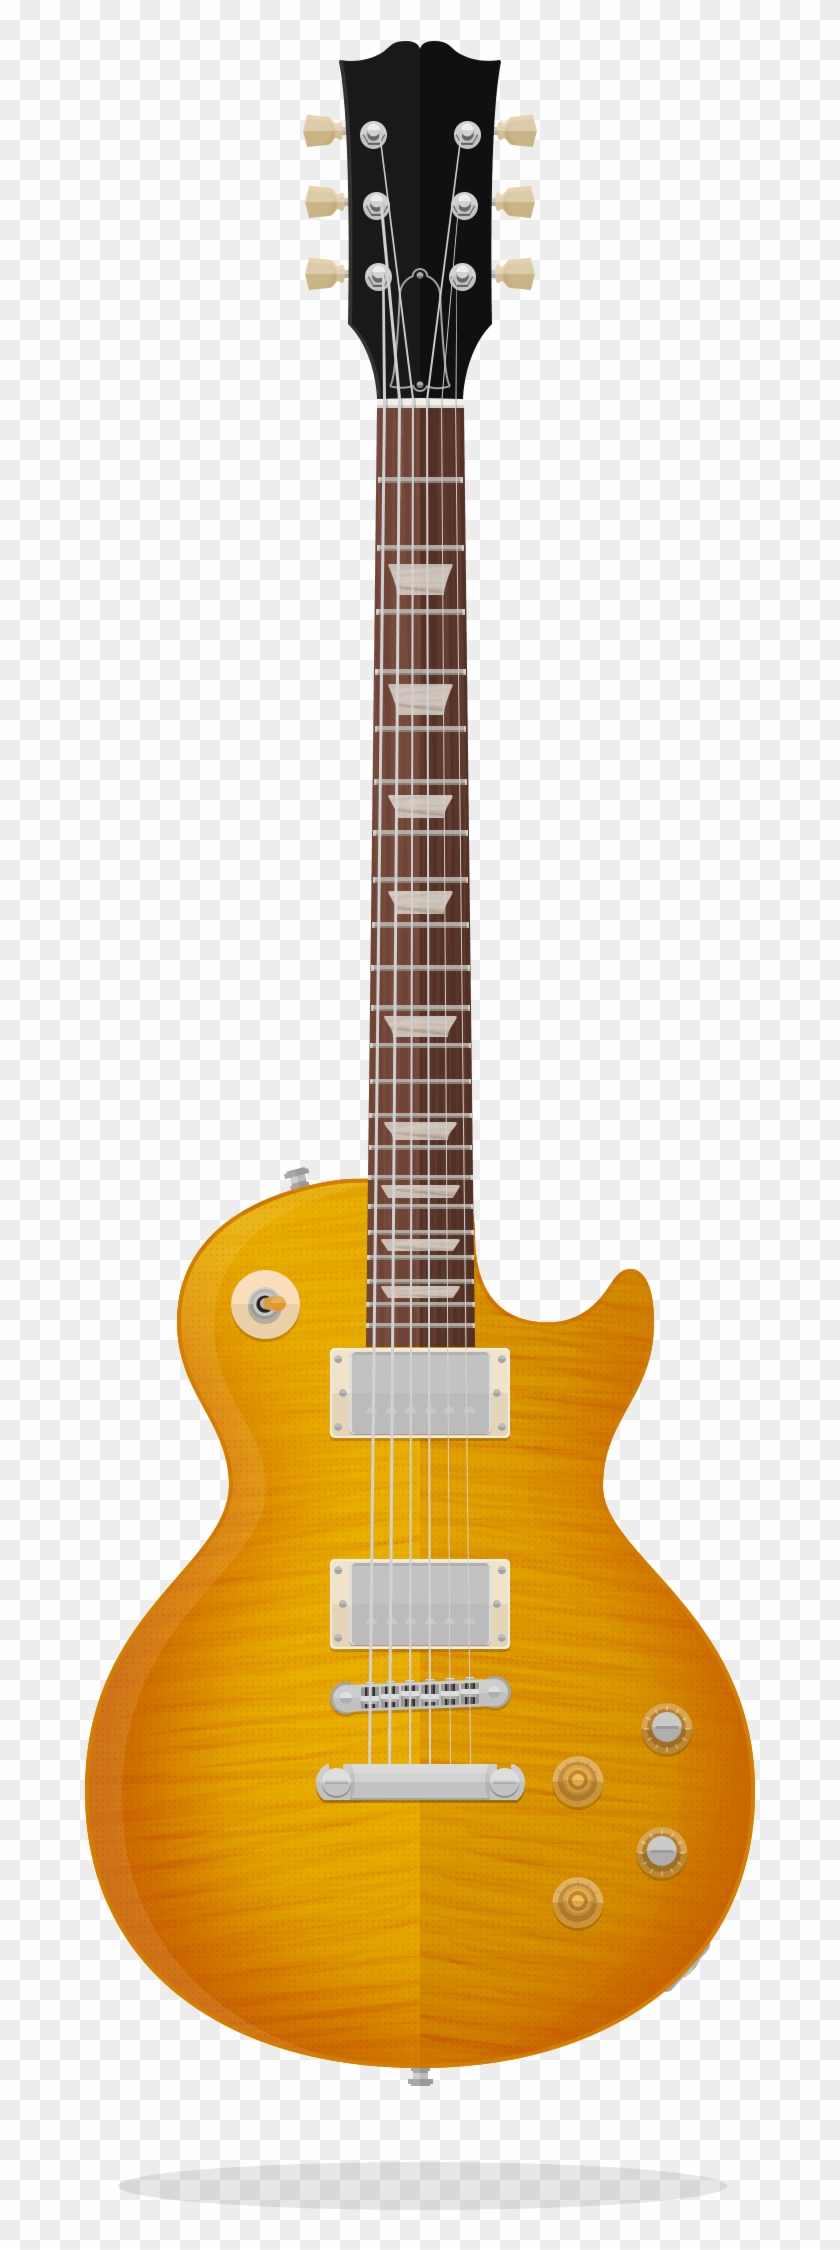 Gibson Les Paul Standard - Les Paul On Stand Clipart #4016750